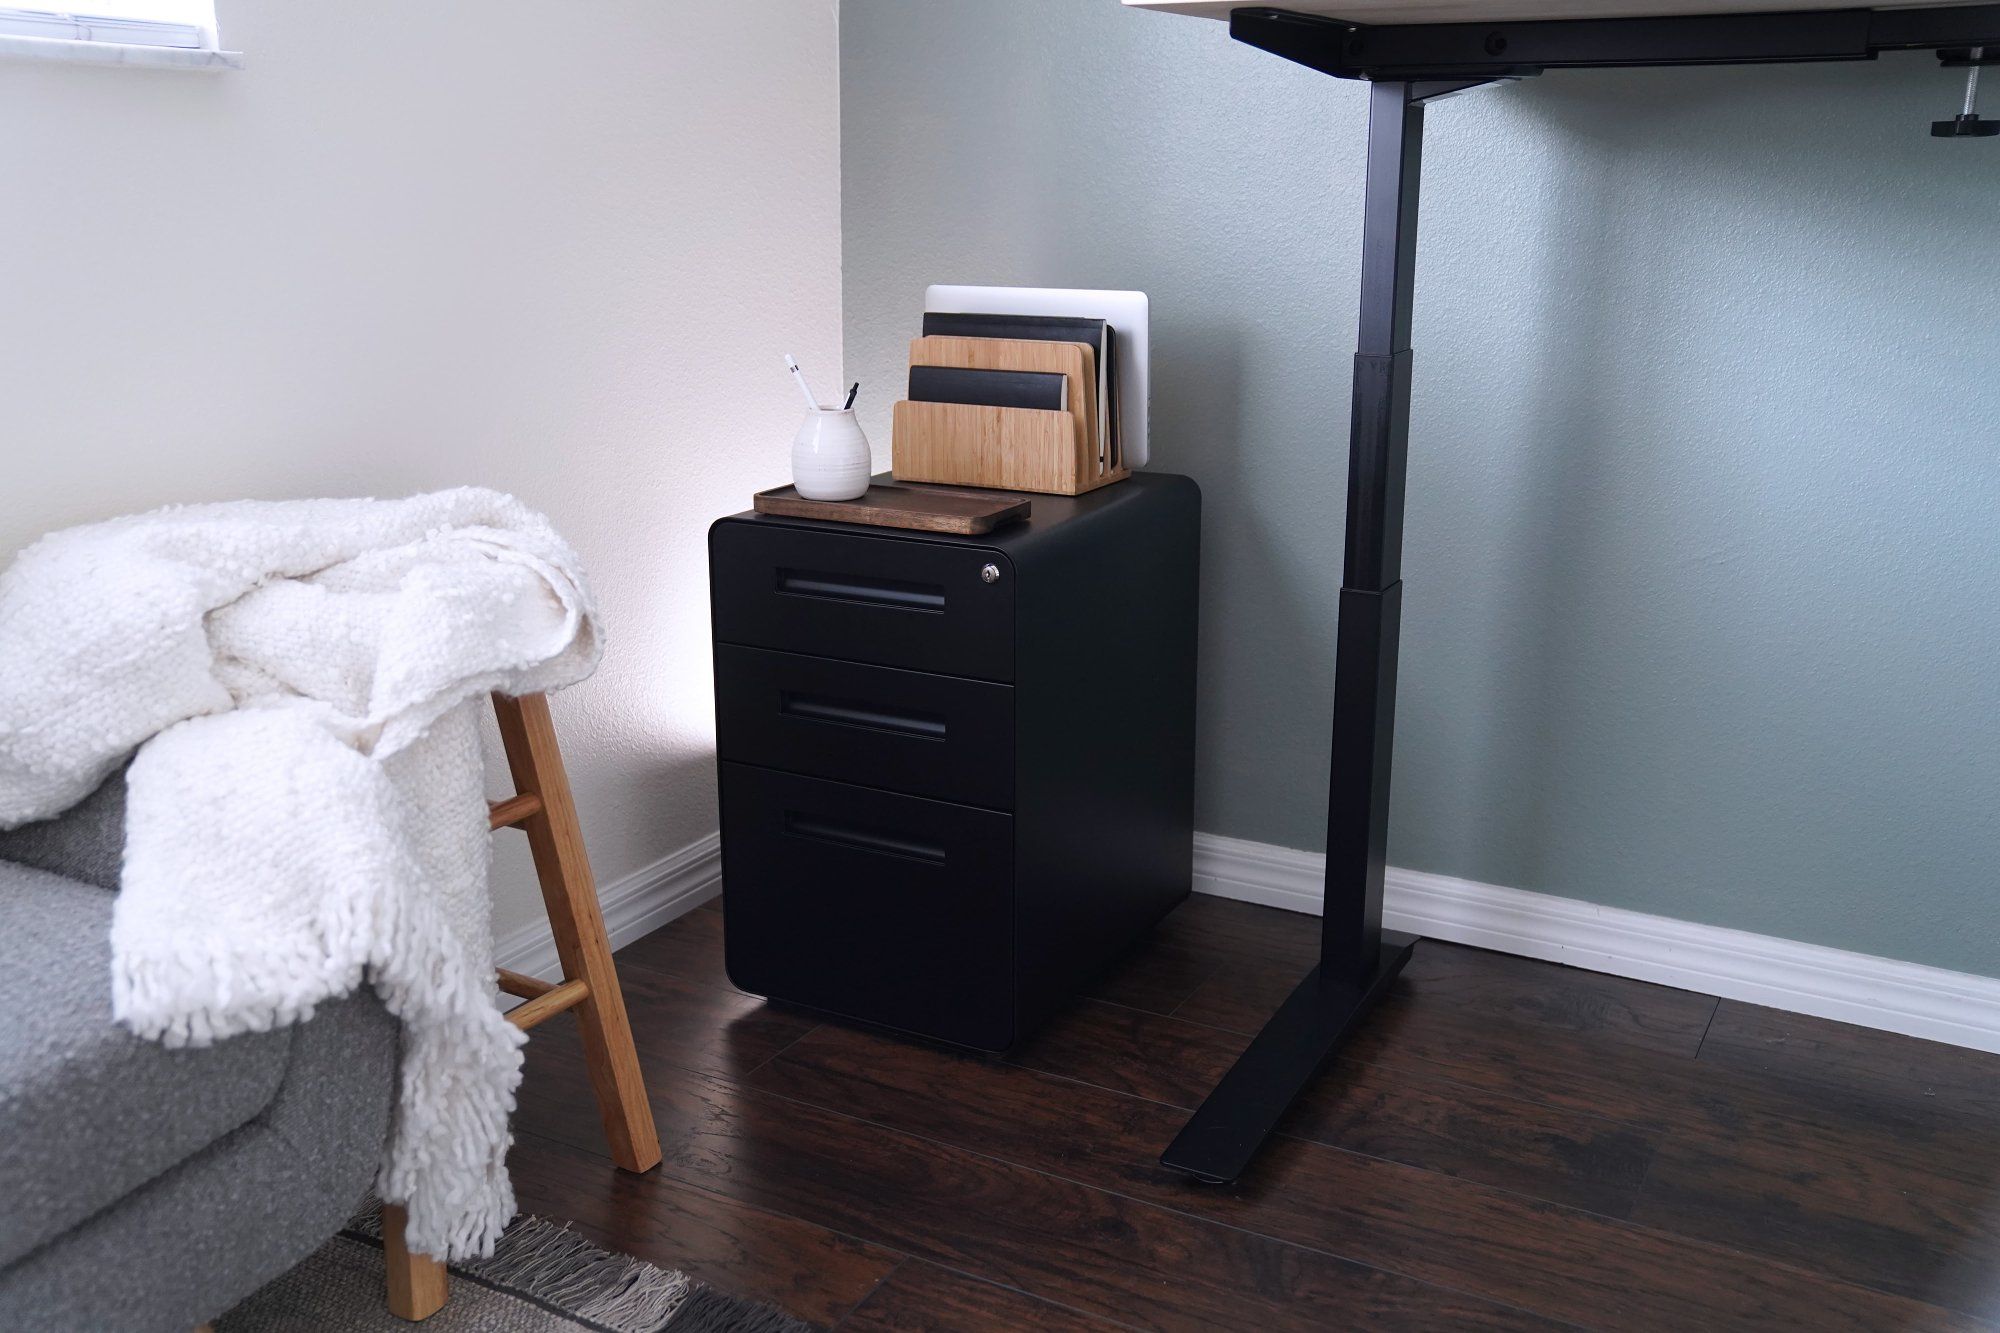 A home office corner with a Laura Davidson’s Stockpile Curve 3-drawer file cabinet in black